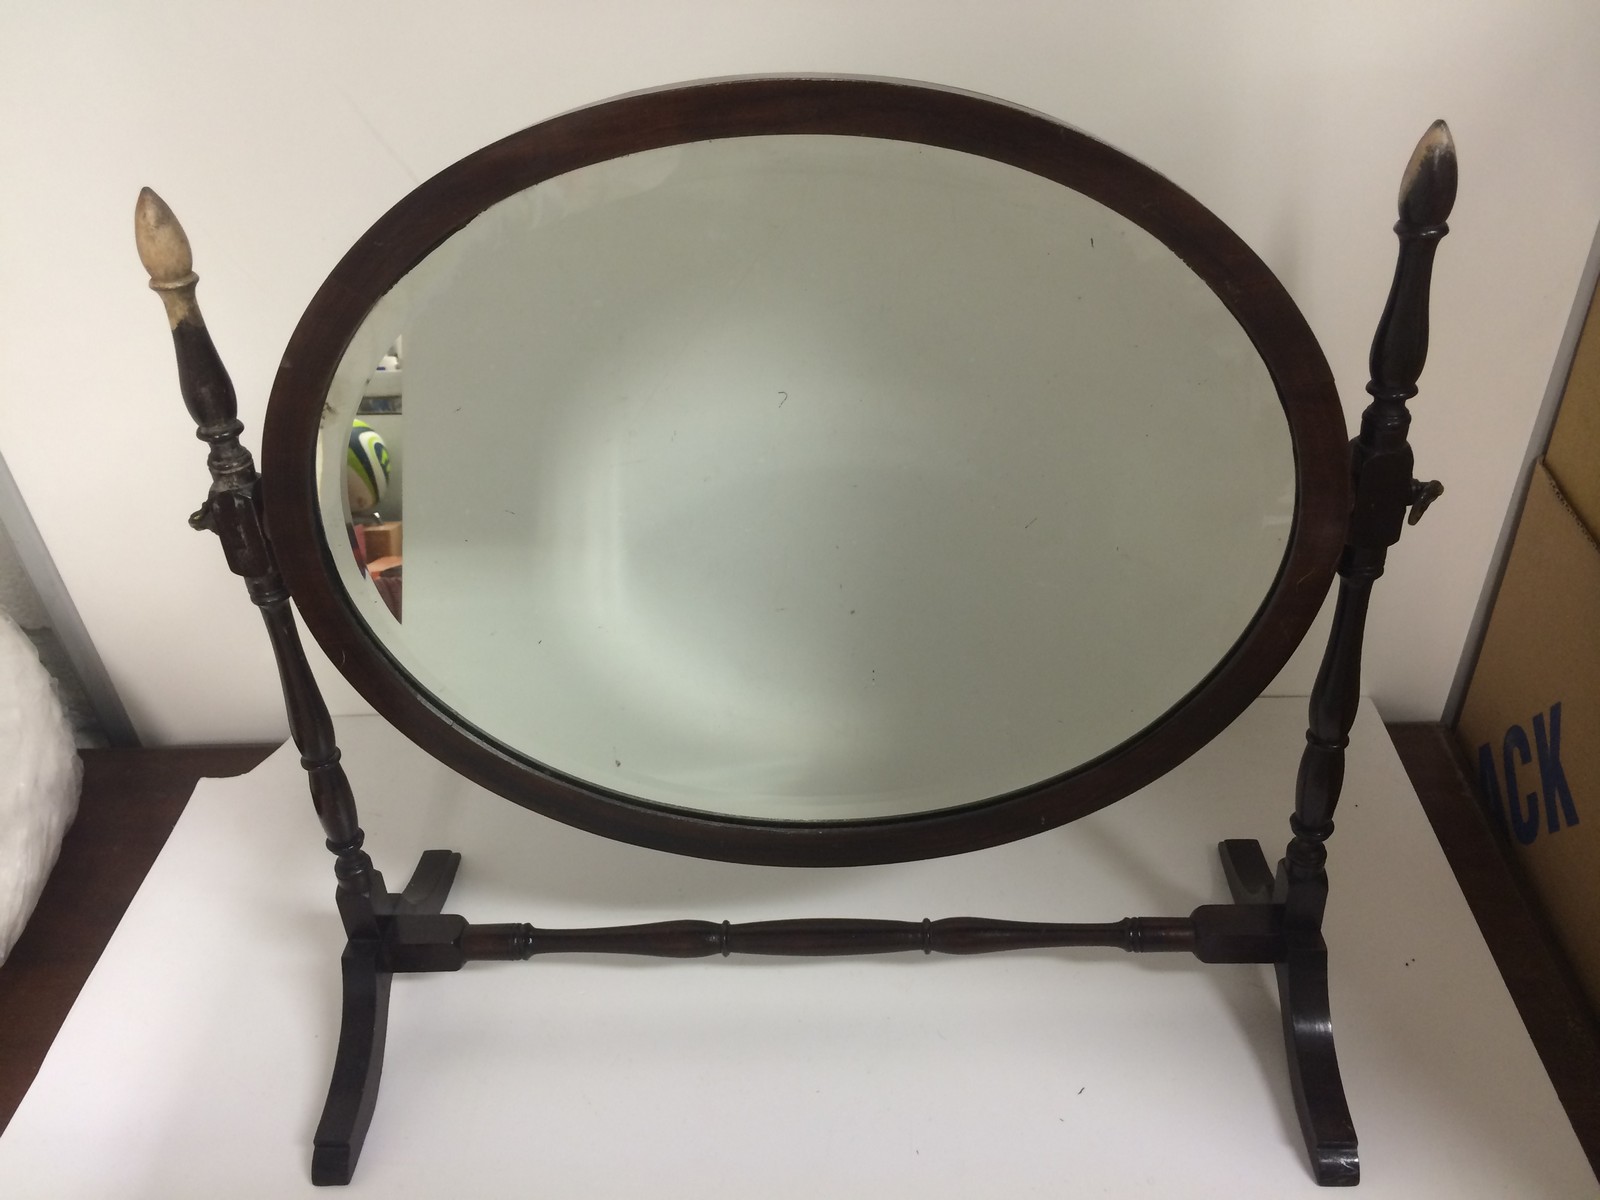 Lovely dressing table oval mirror